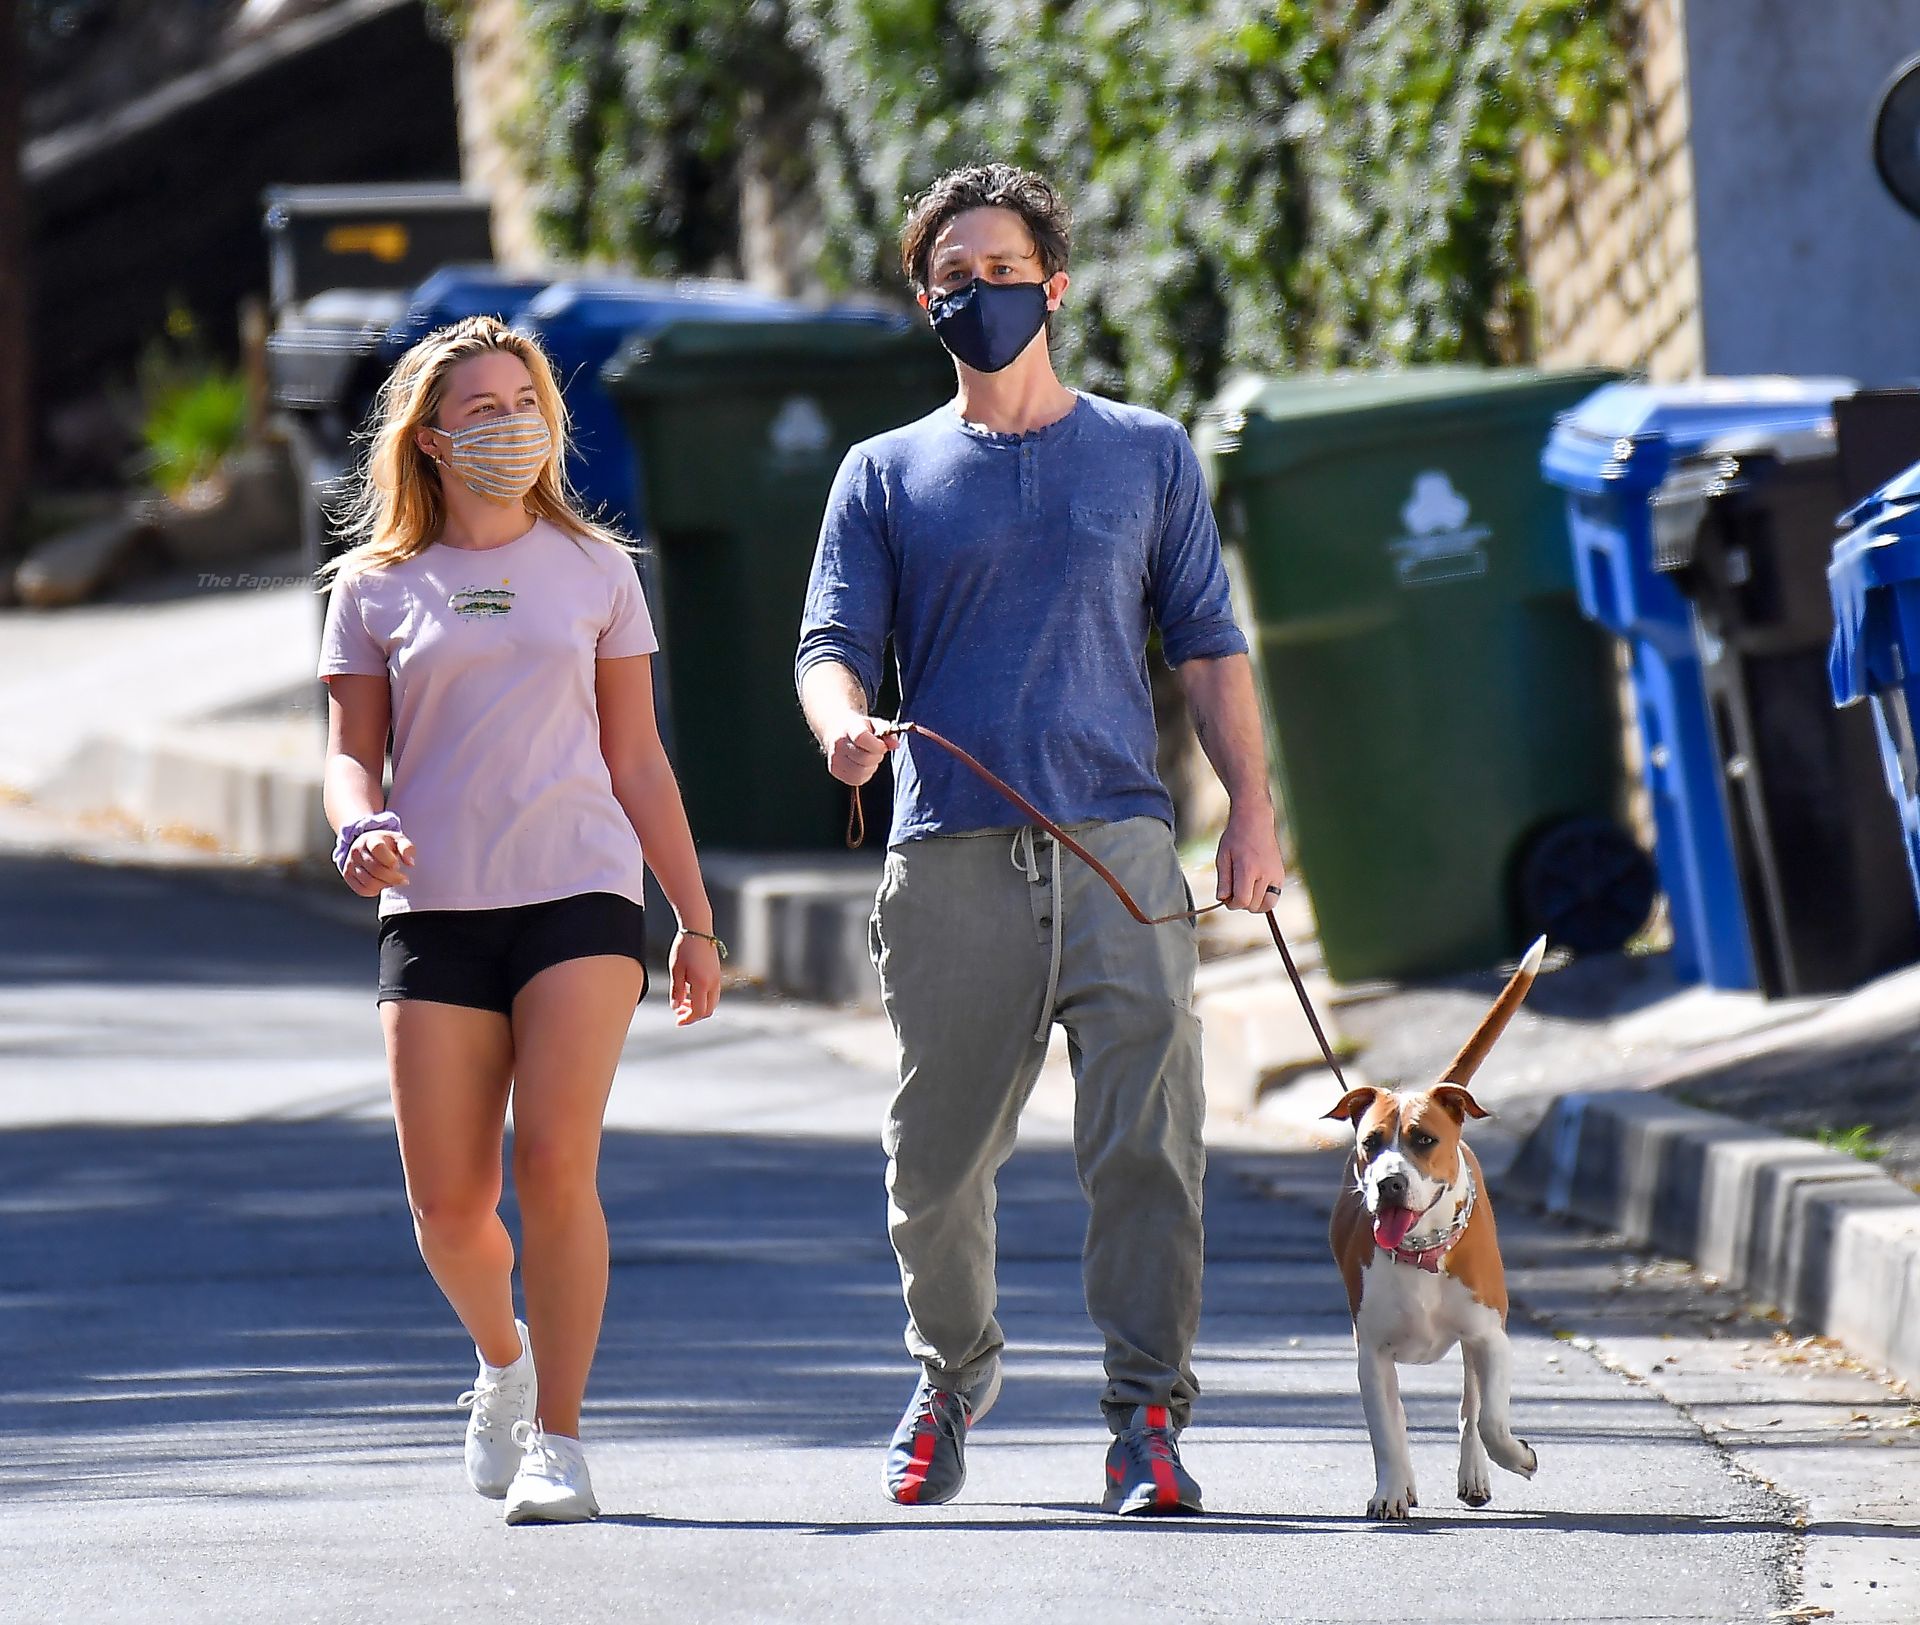 Zach Braff Is Seen with Braless Florence Pugh in LA (17 Photos)